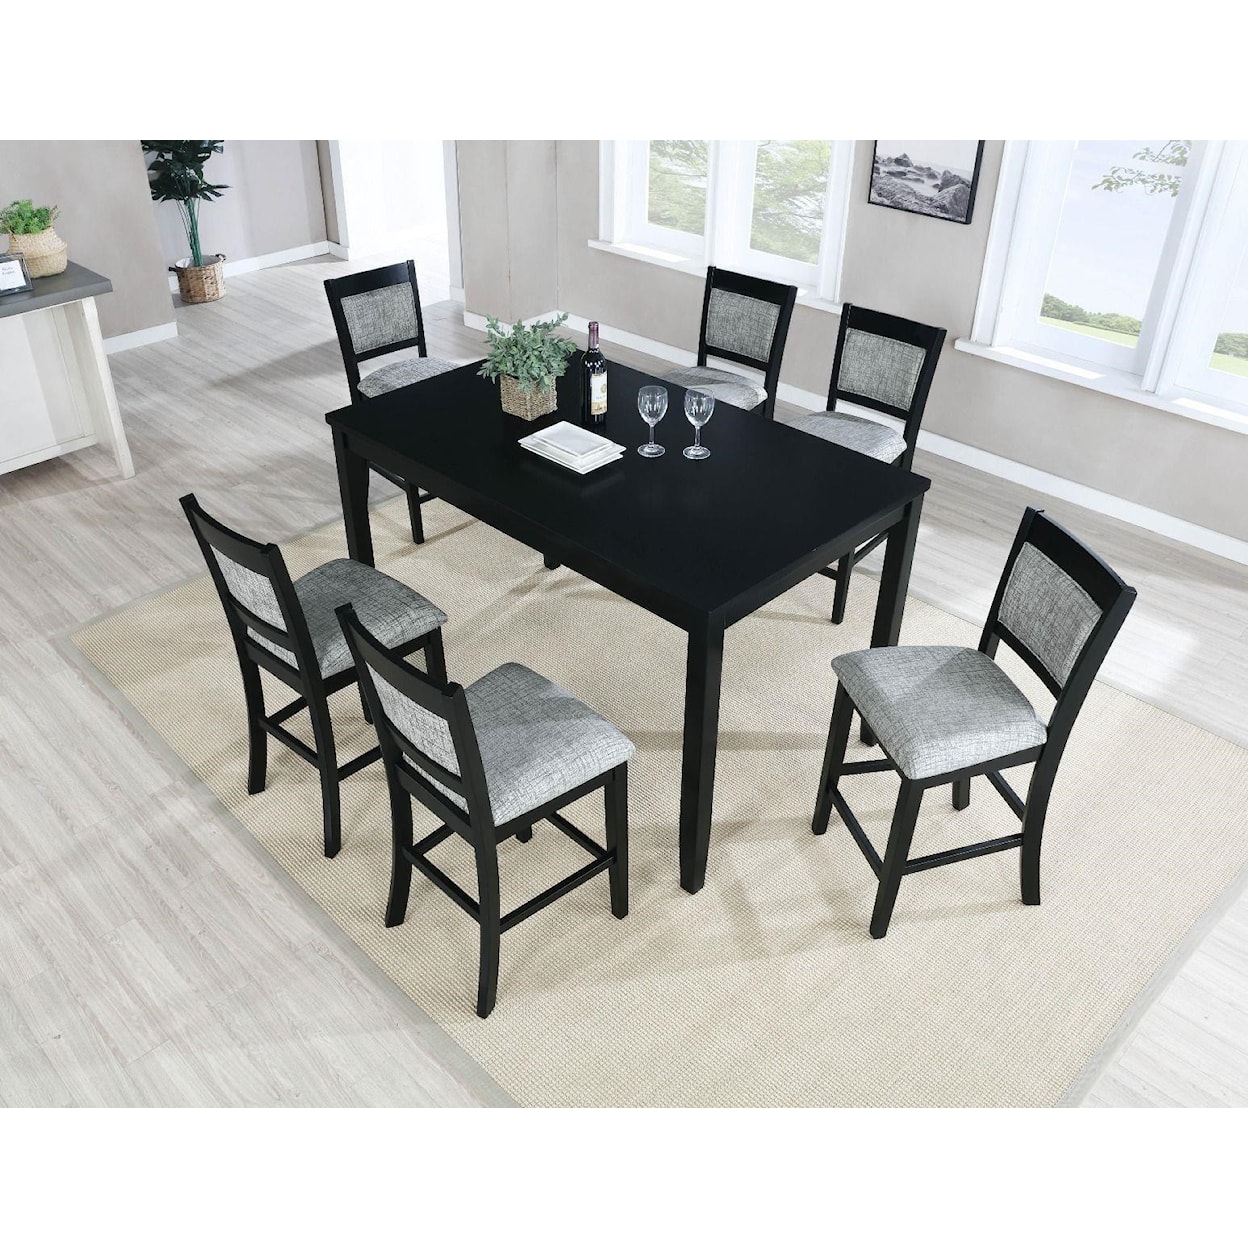 Vilo Home Upstate 7pc Dining Set - All in One Box